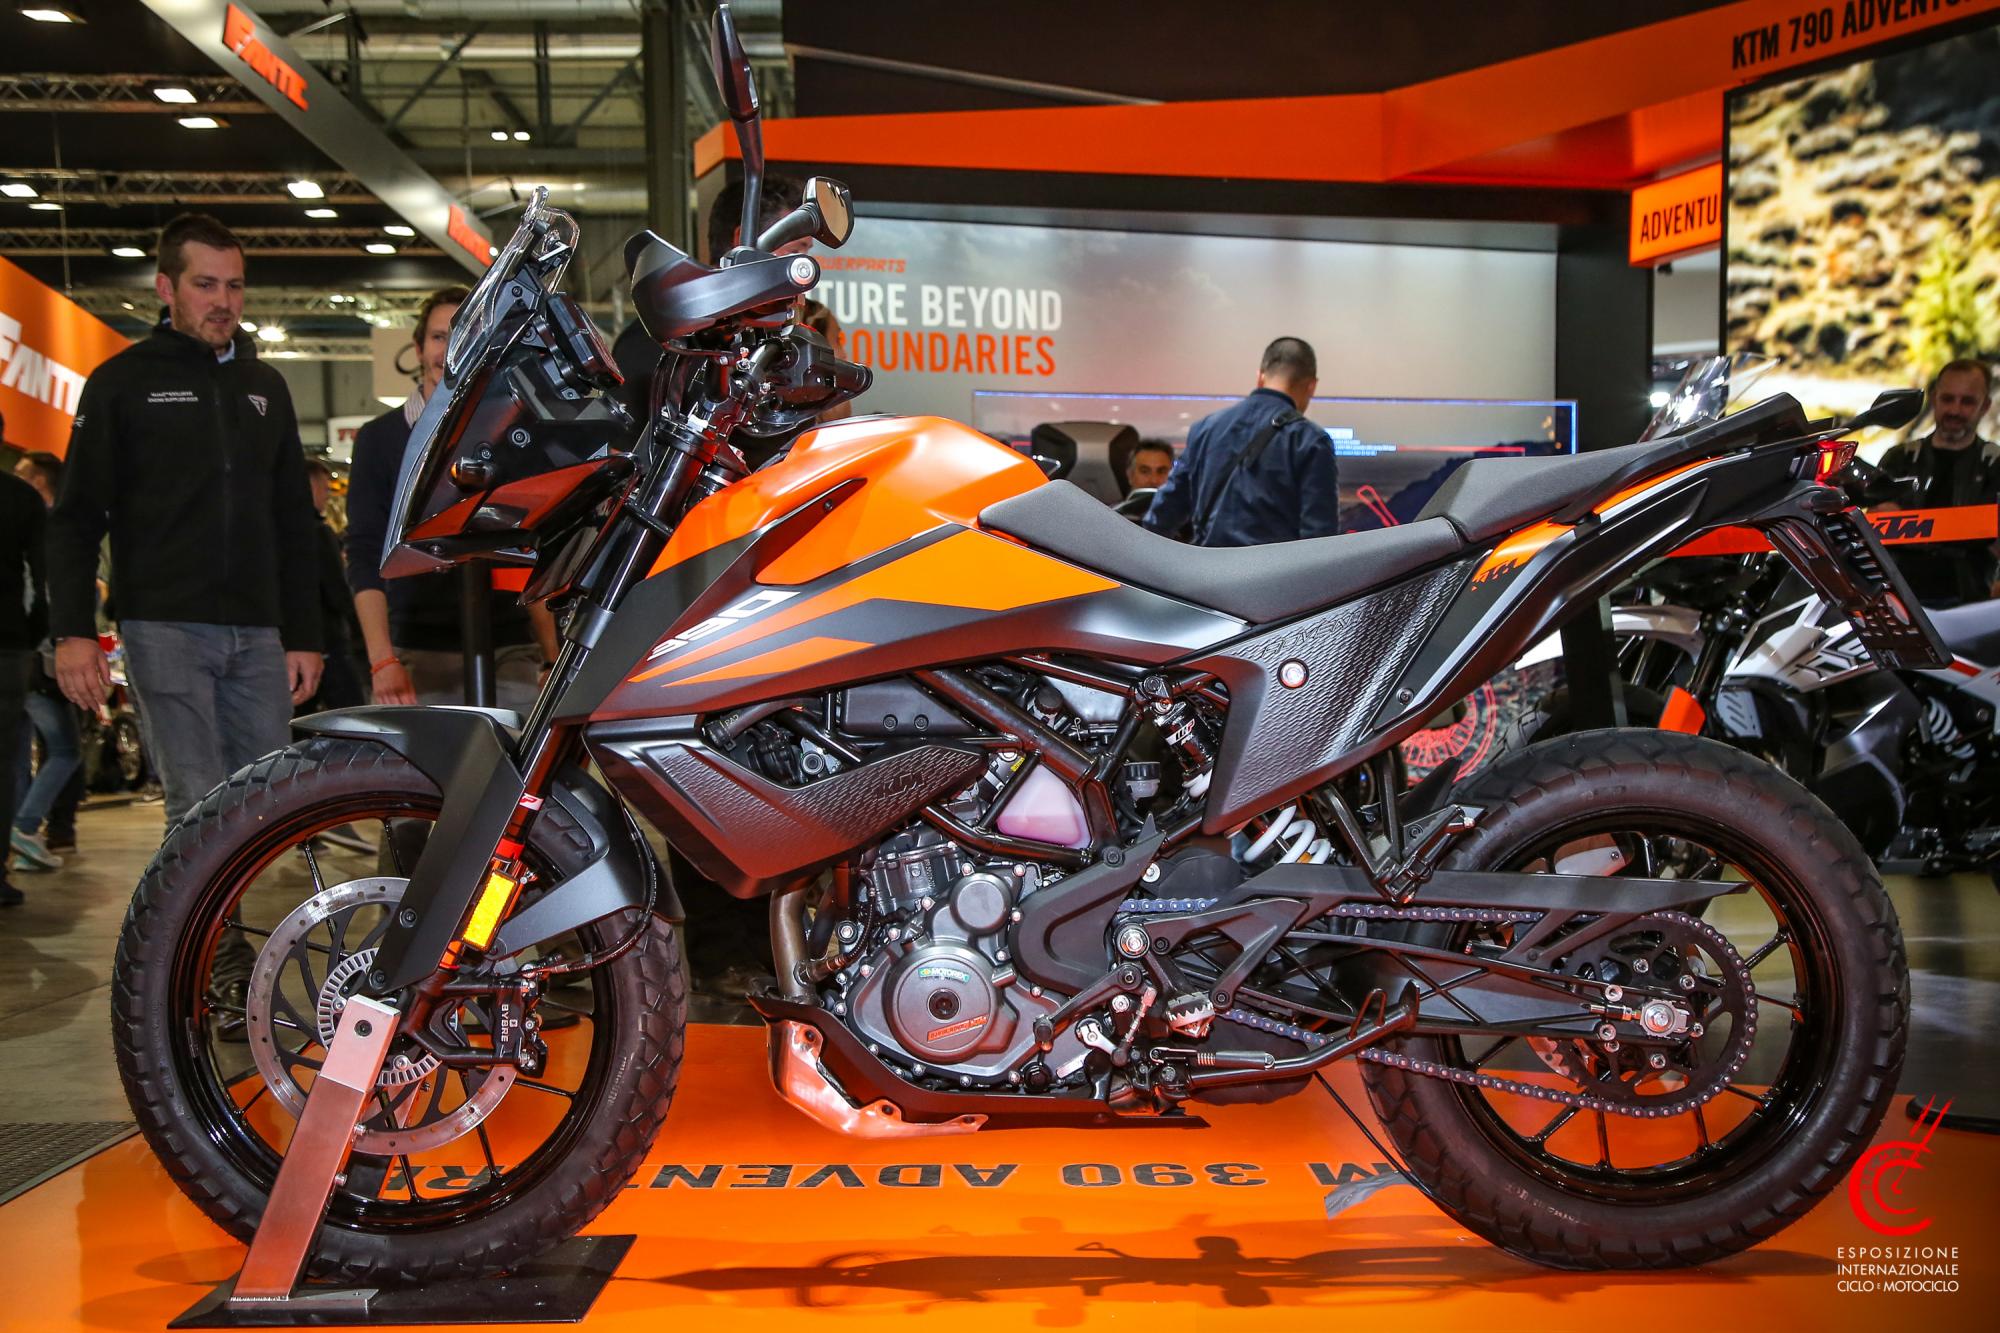 More dealerships commence unofficial pre-bookings for KTM 390 Adventure